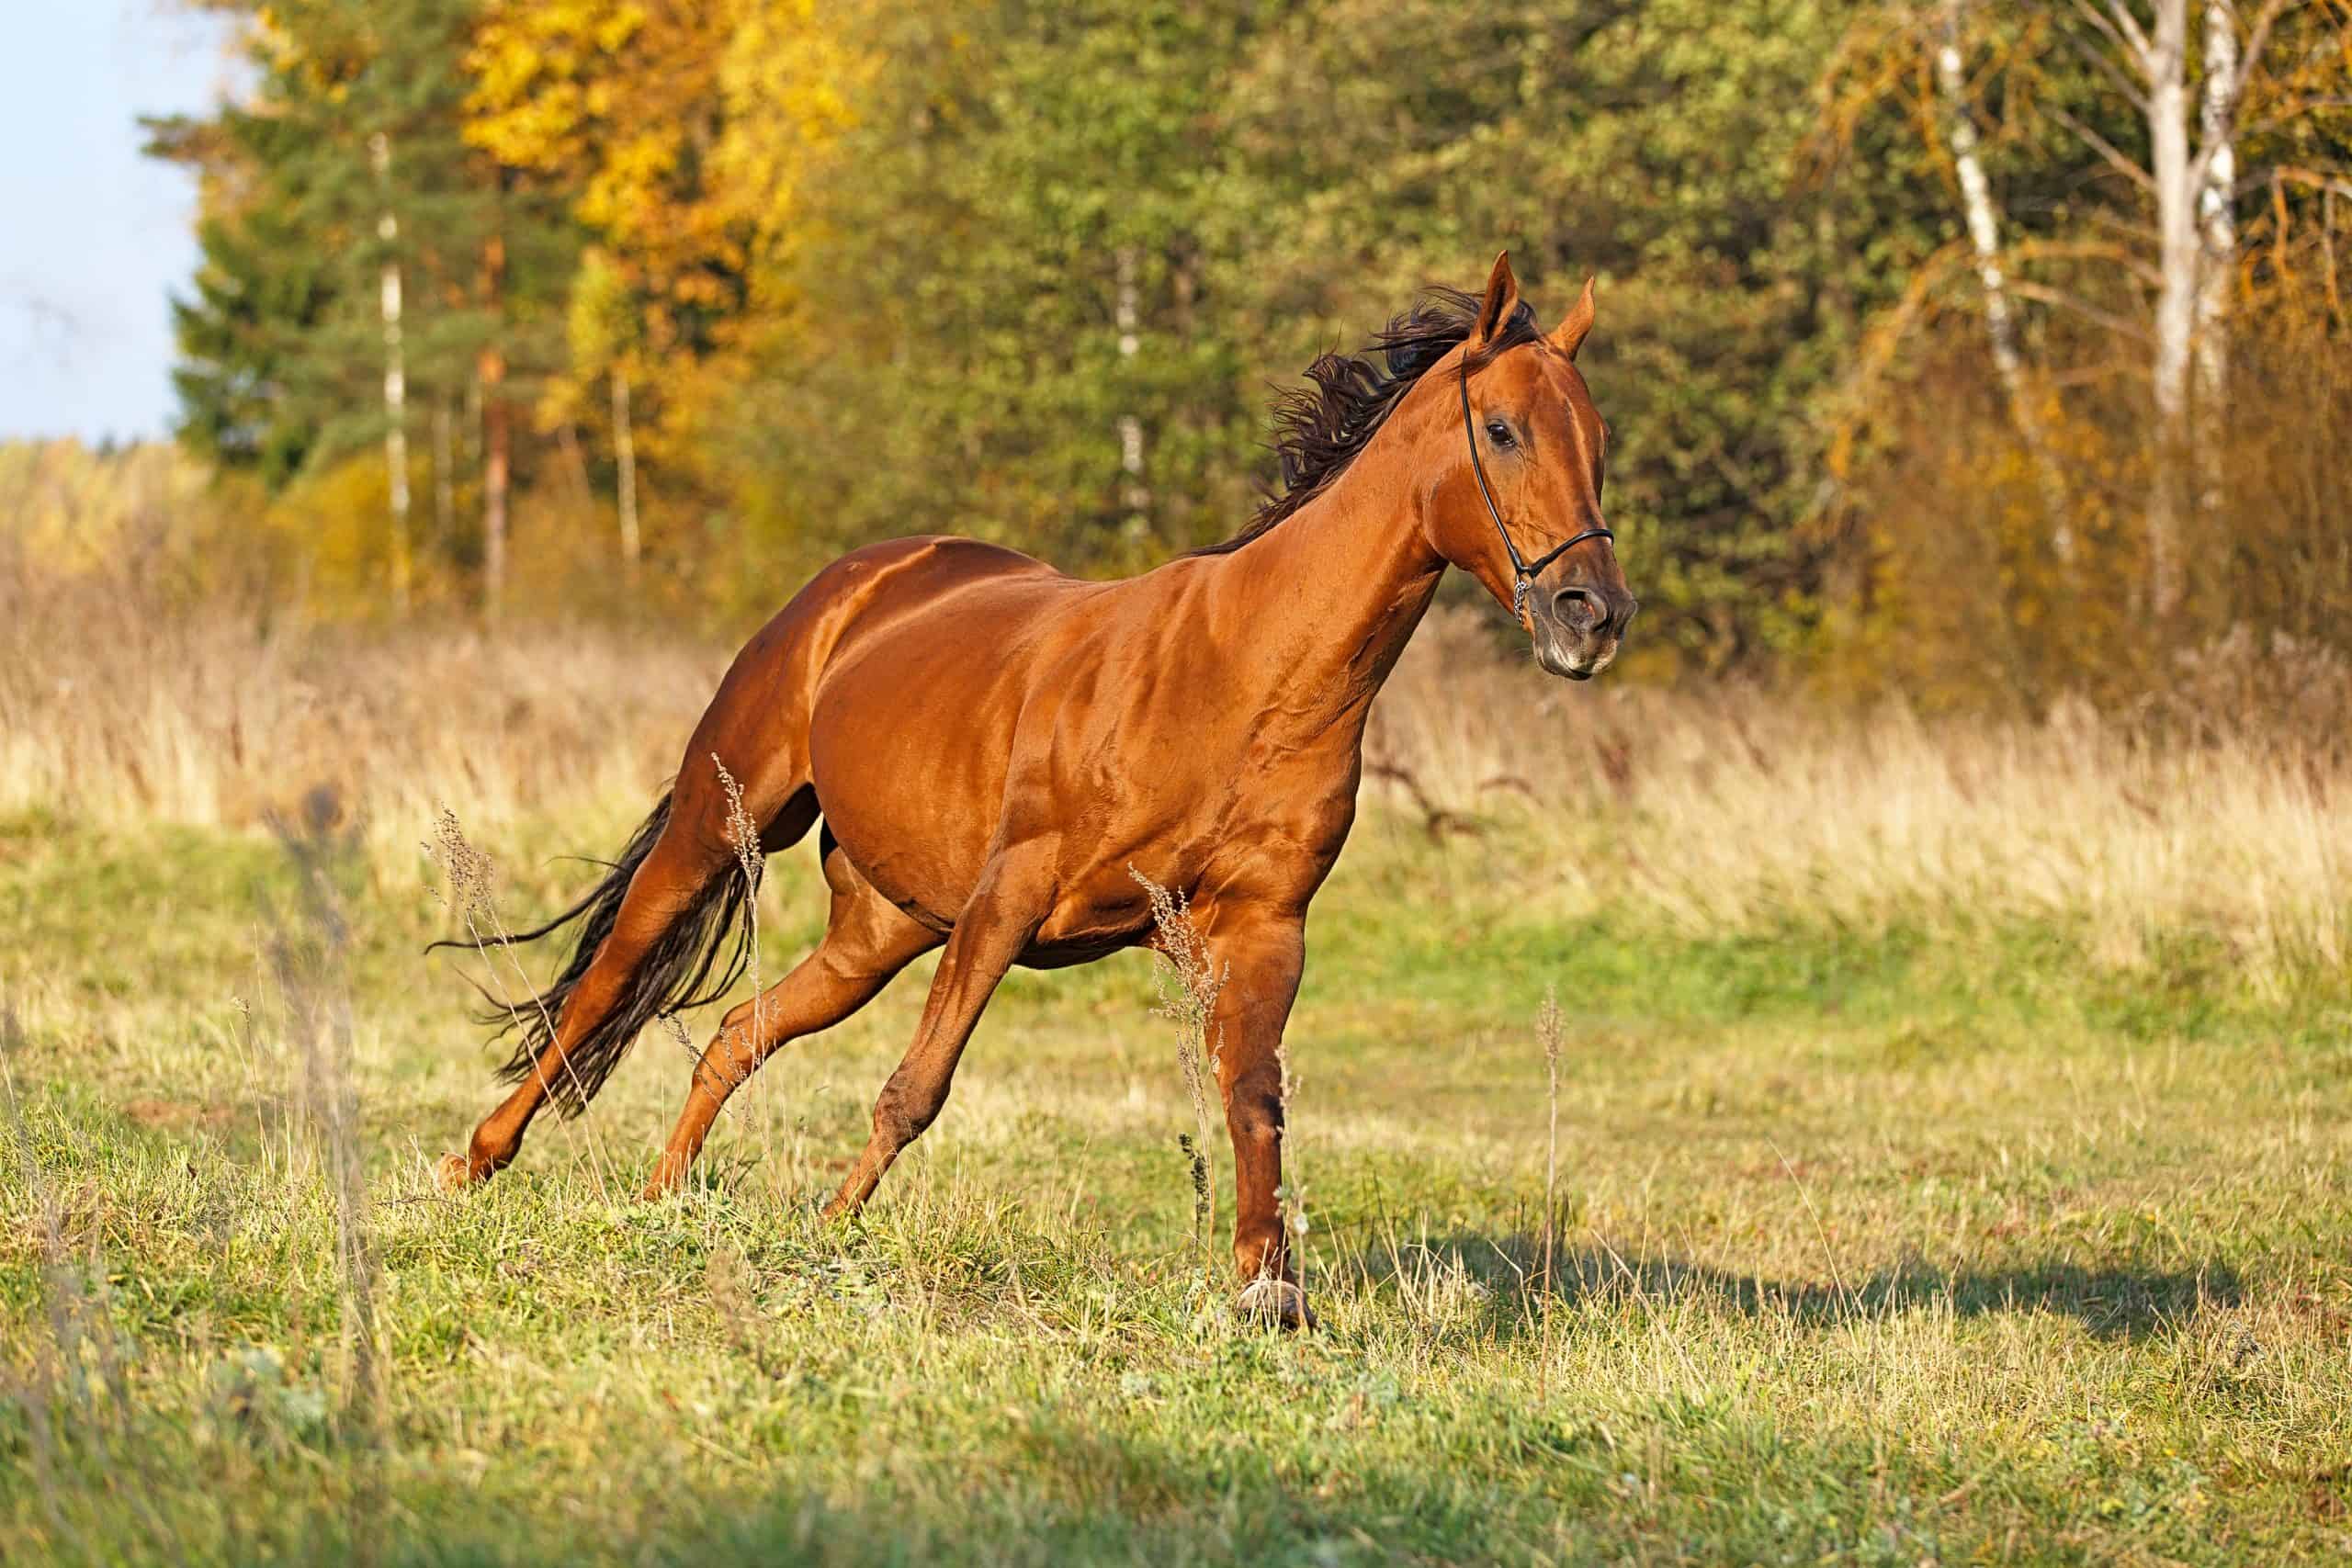 Horse cantering in the field